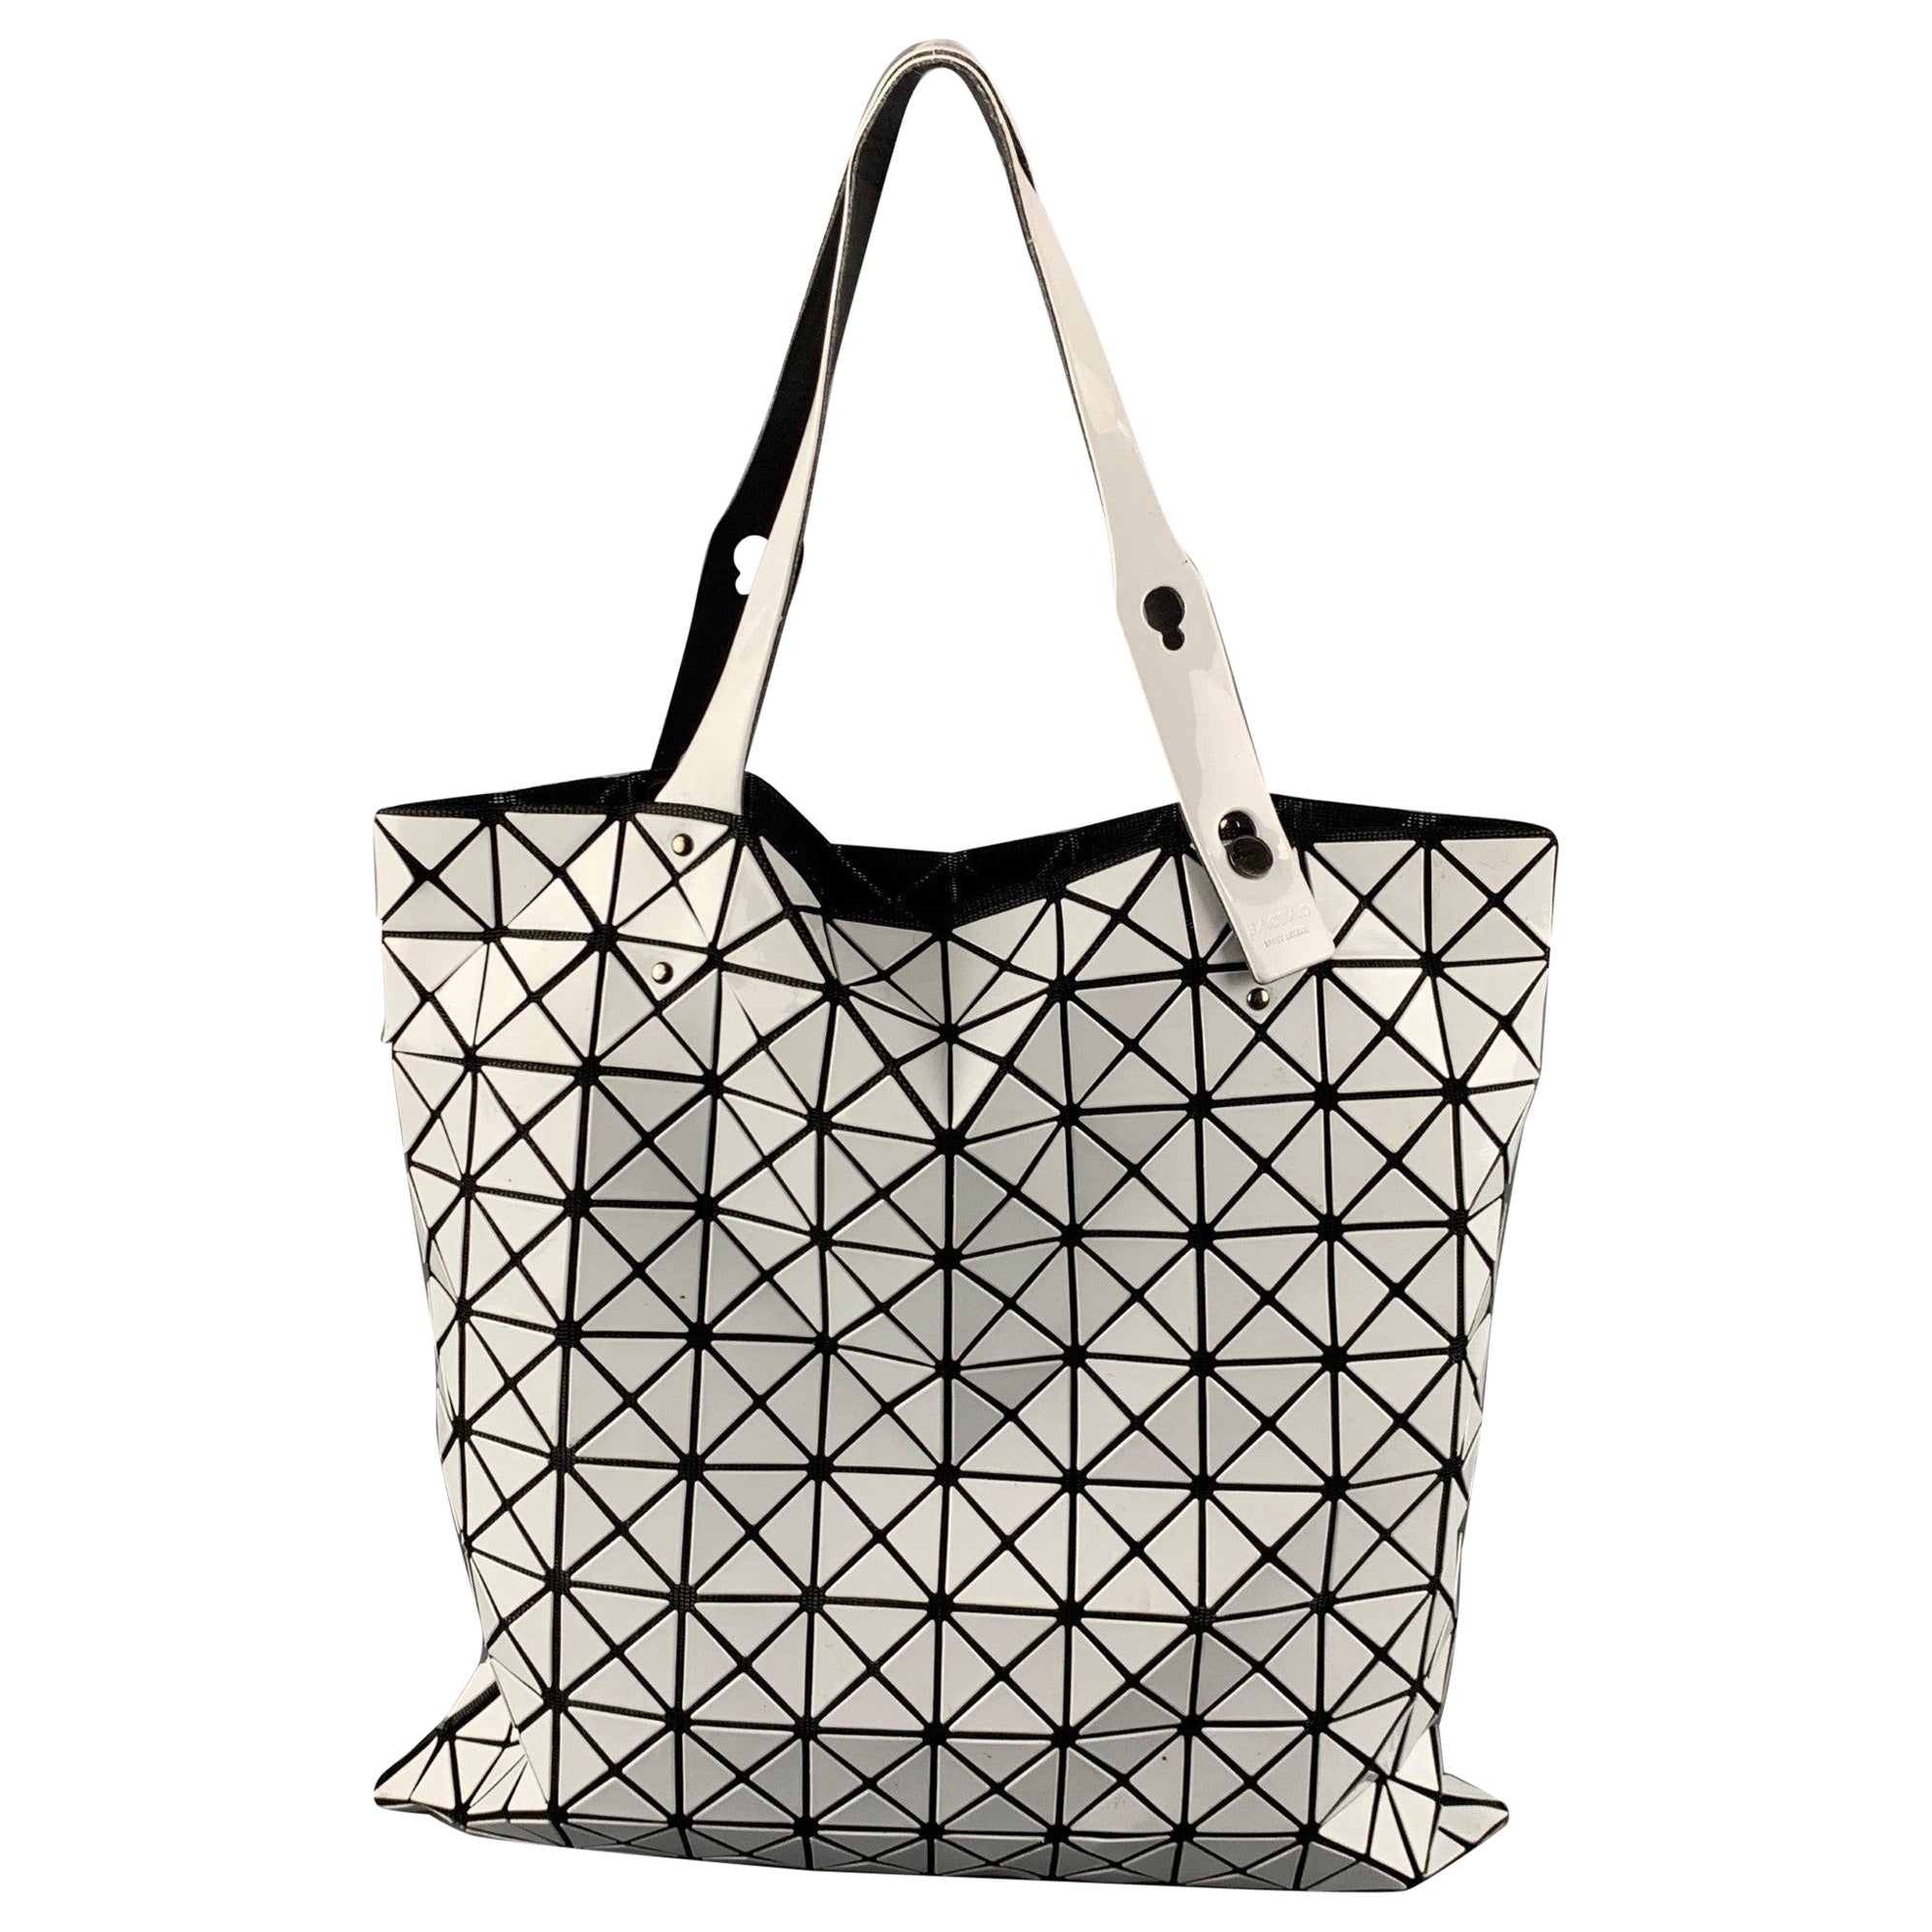 ISSEY MIYAKE White Black Triangle PVC Tote Handbag & Leather Goods For Sale